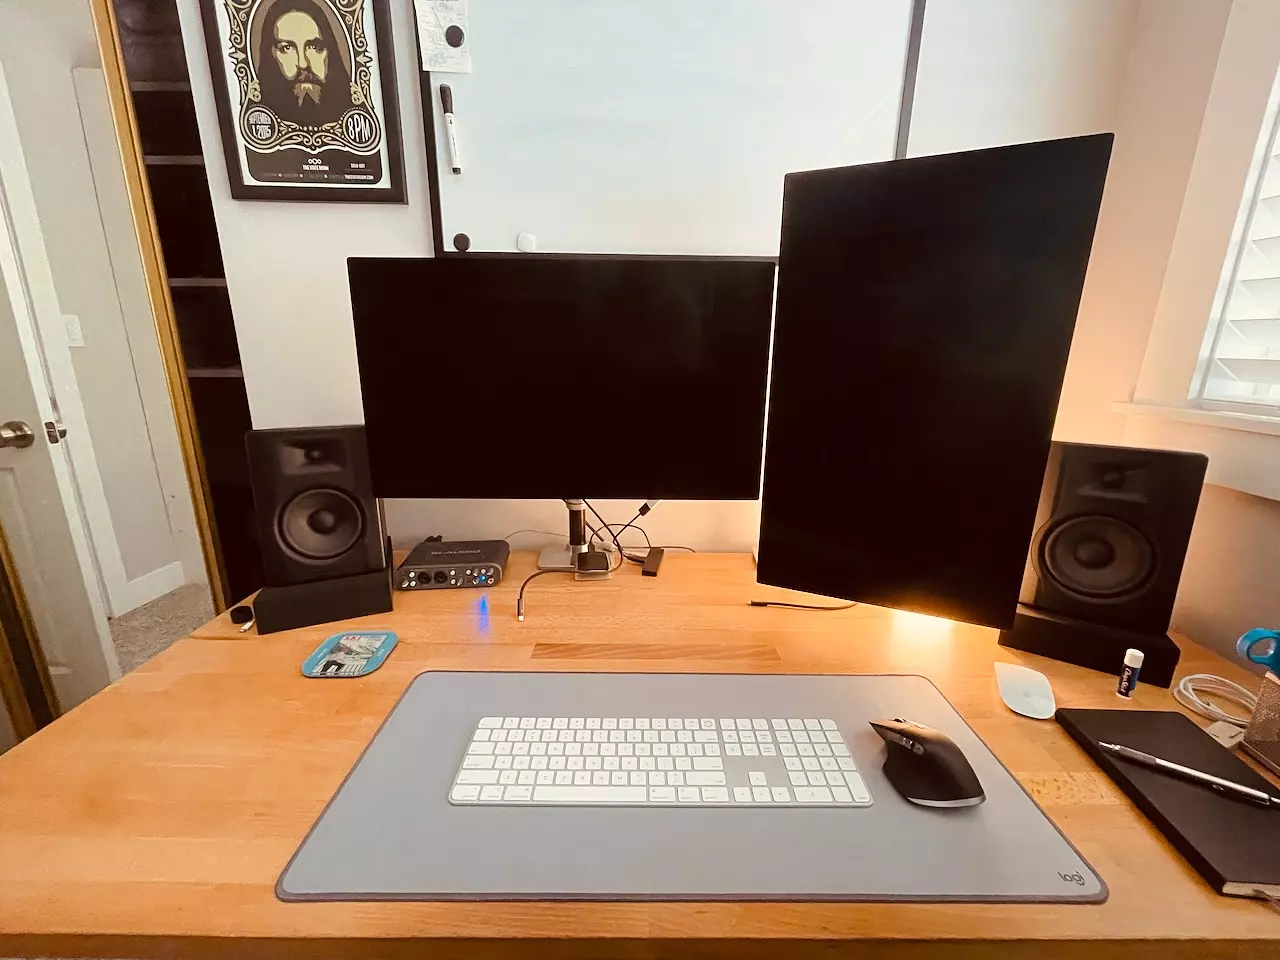 Computer desk with two monitors, speakers, mouse, and keyboard.